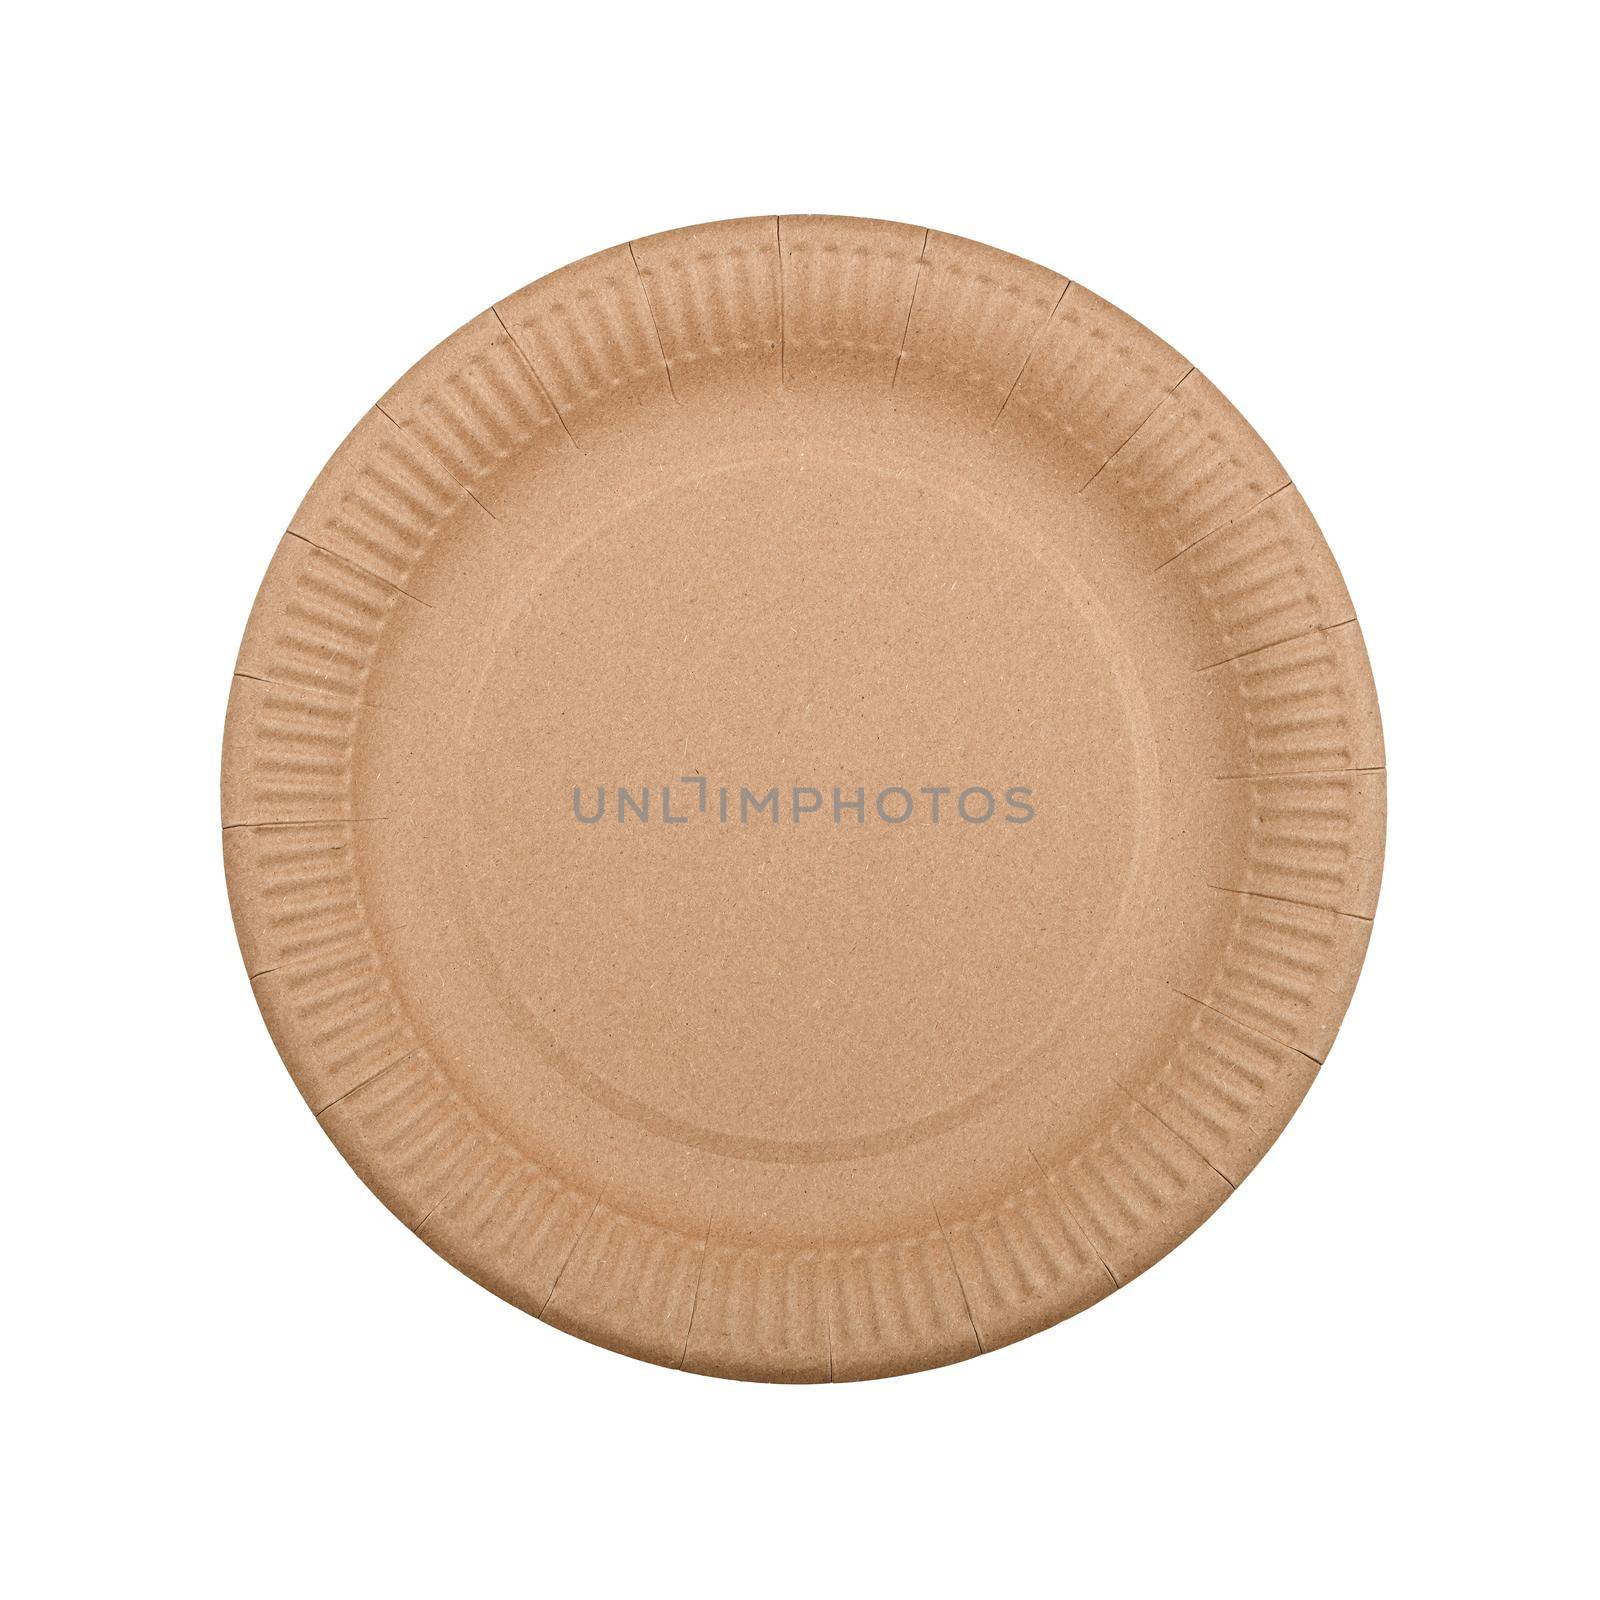 Close up one round disposable brown paper plate isolated on white background, elevated top view, directly above